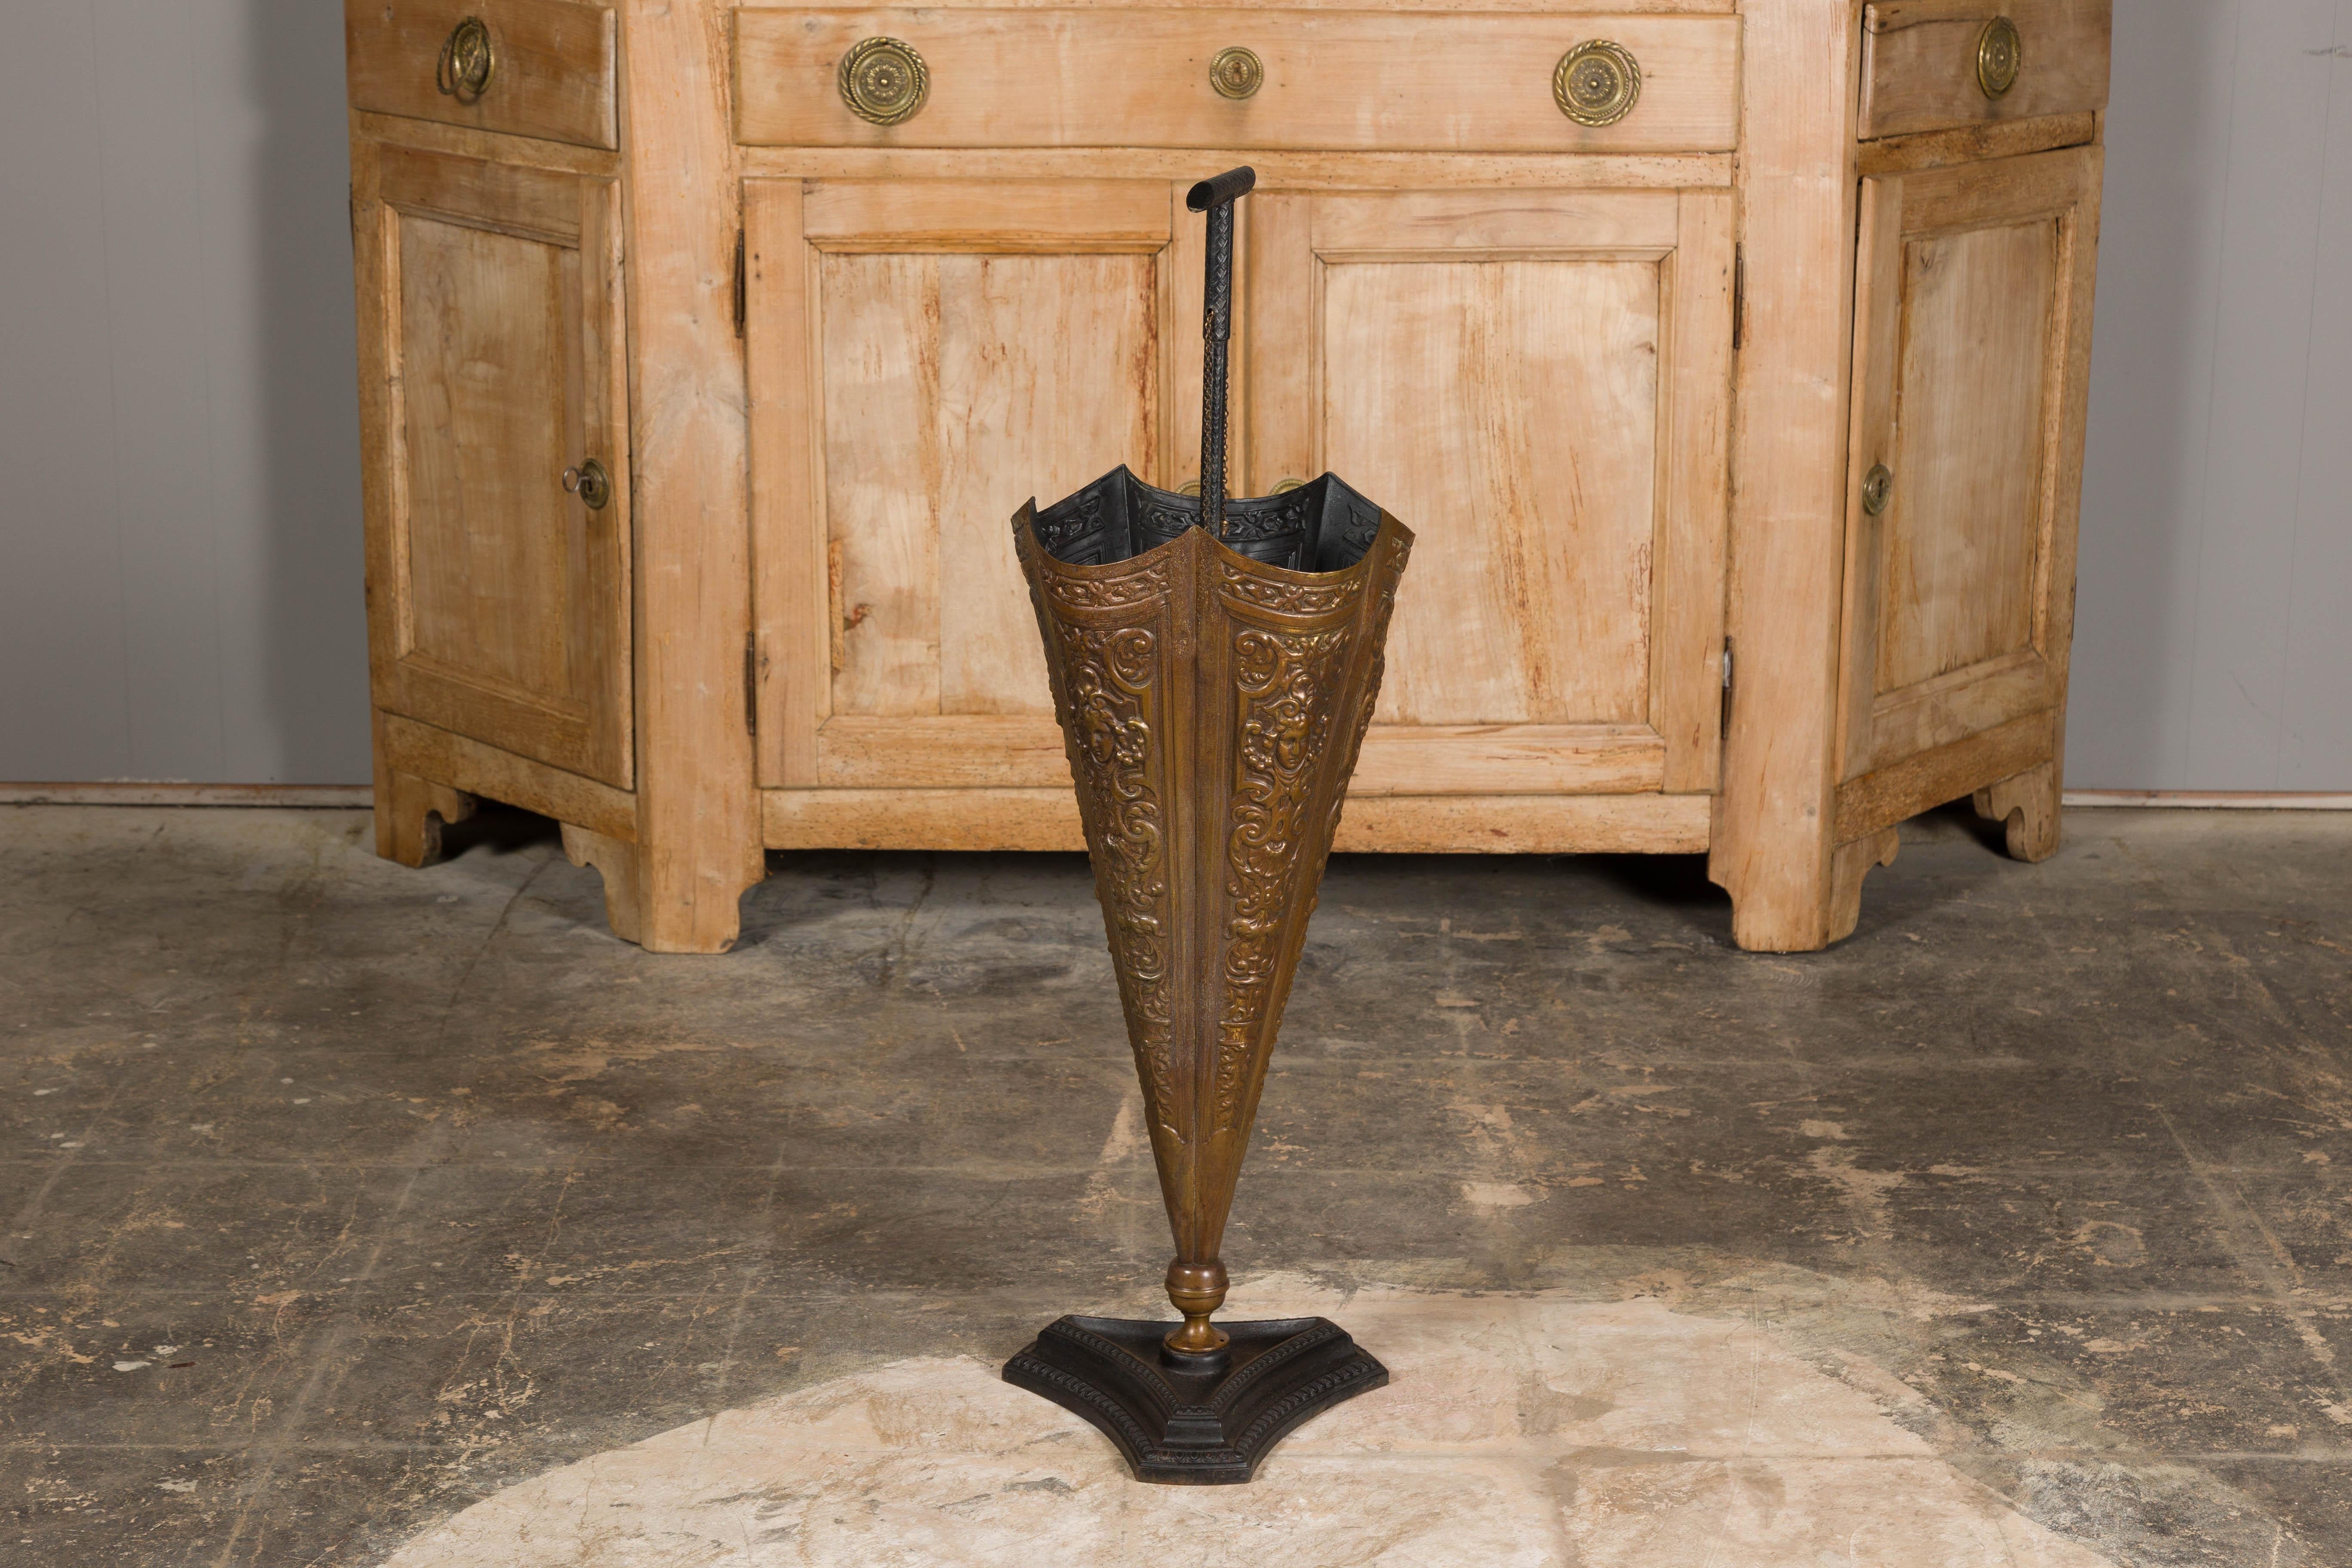 English 1920-1930 Brass Umbrella Stand with Raised Motifs and Tripartite Base In Good Condition For Sale In Atlanta, GA